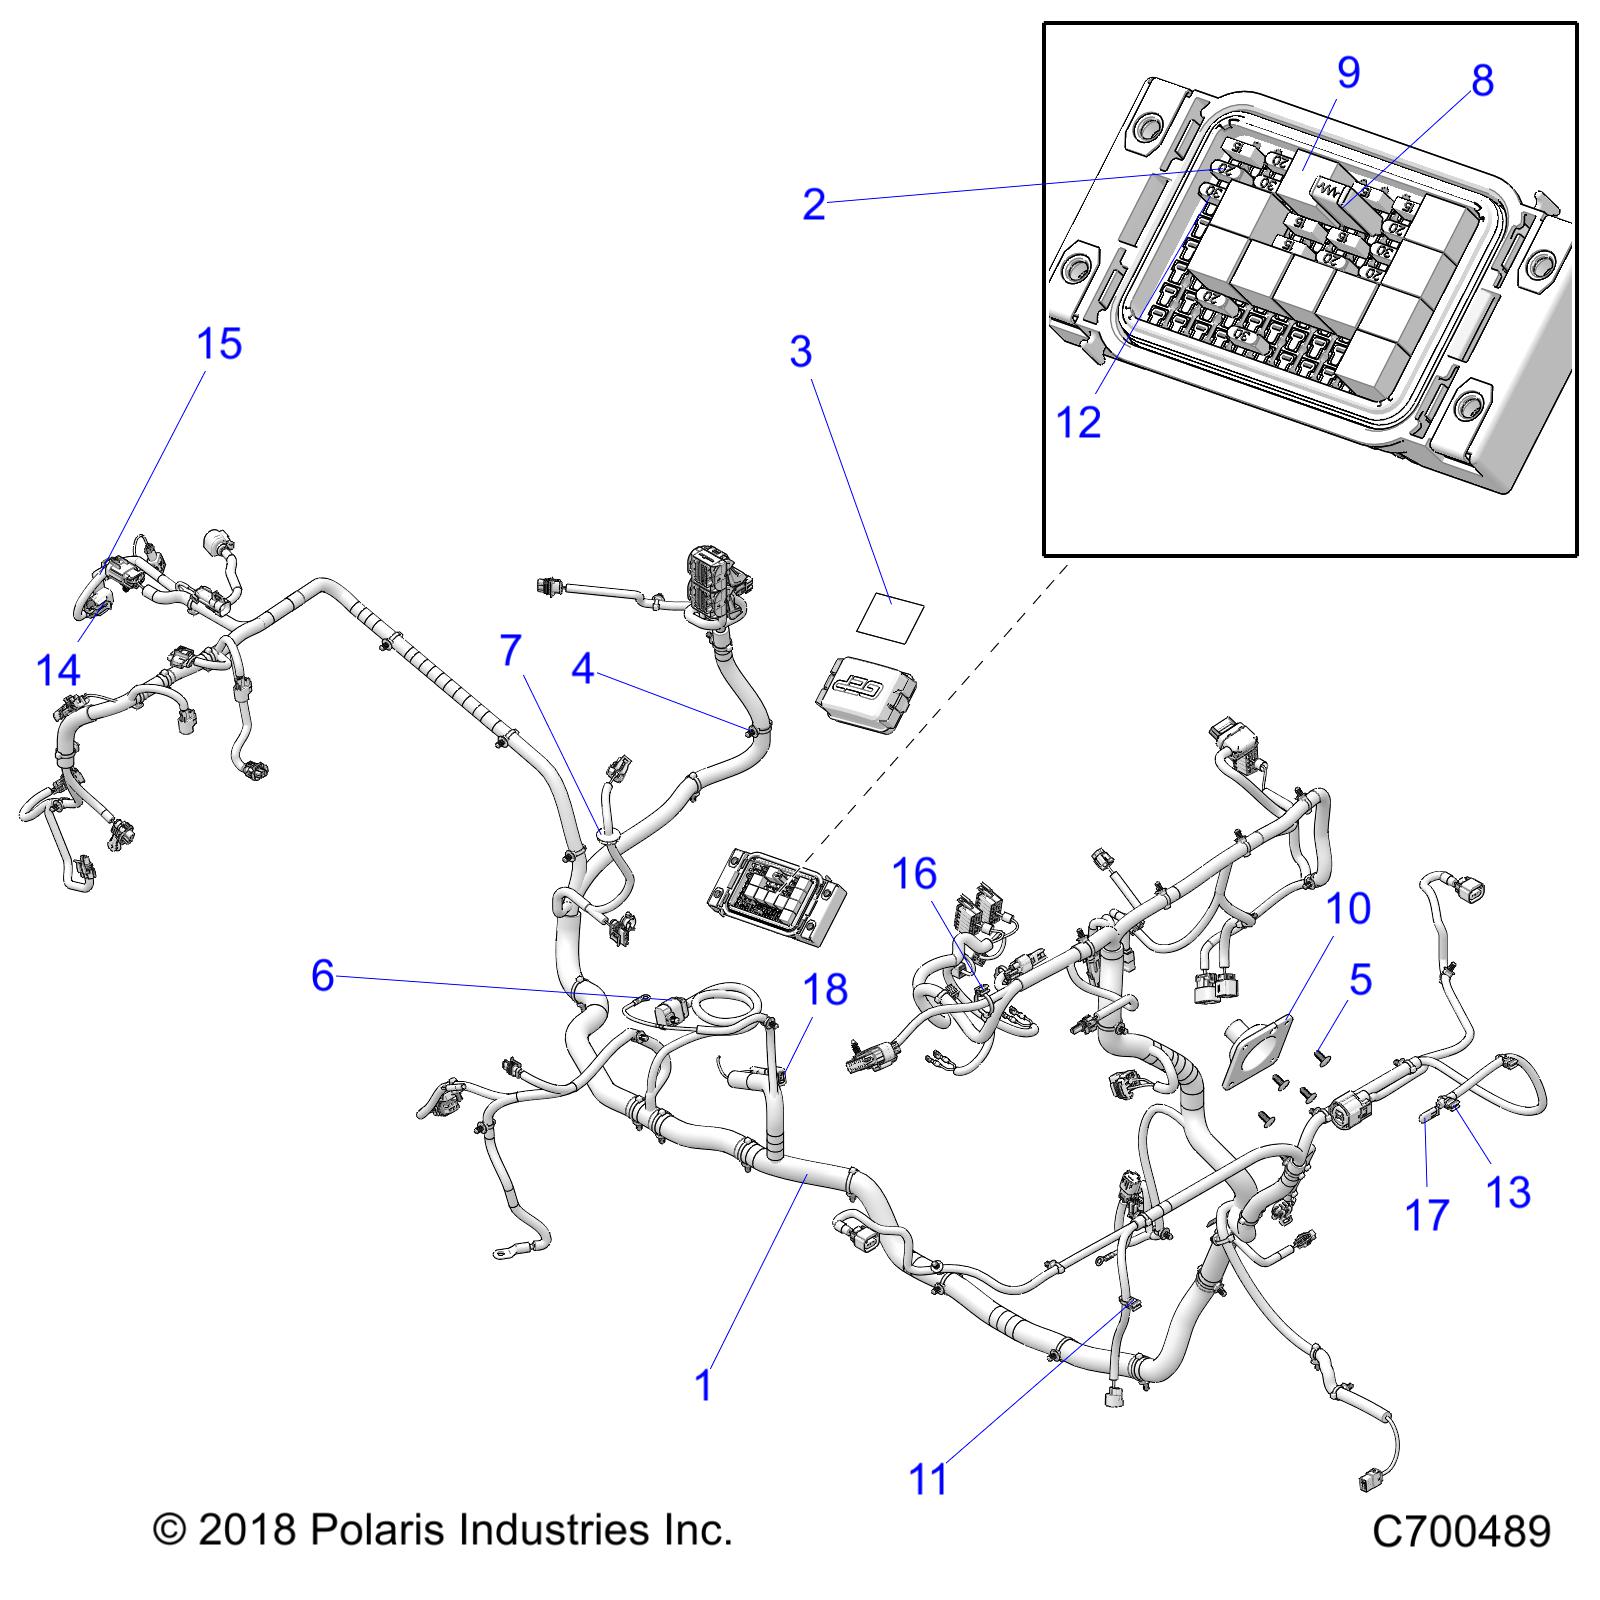 Part Number : 2414858 HVAC CHASSIS HARNESS